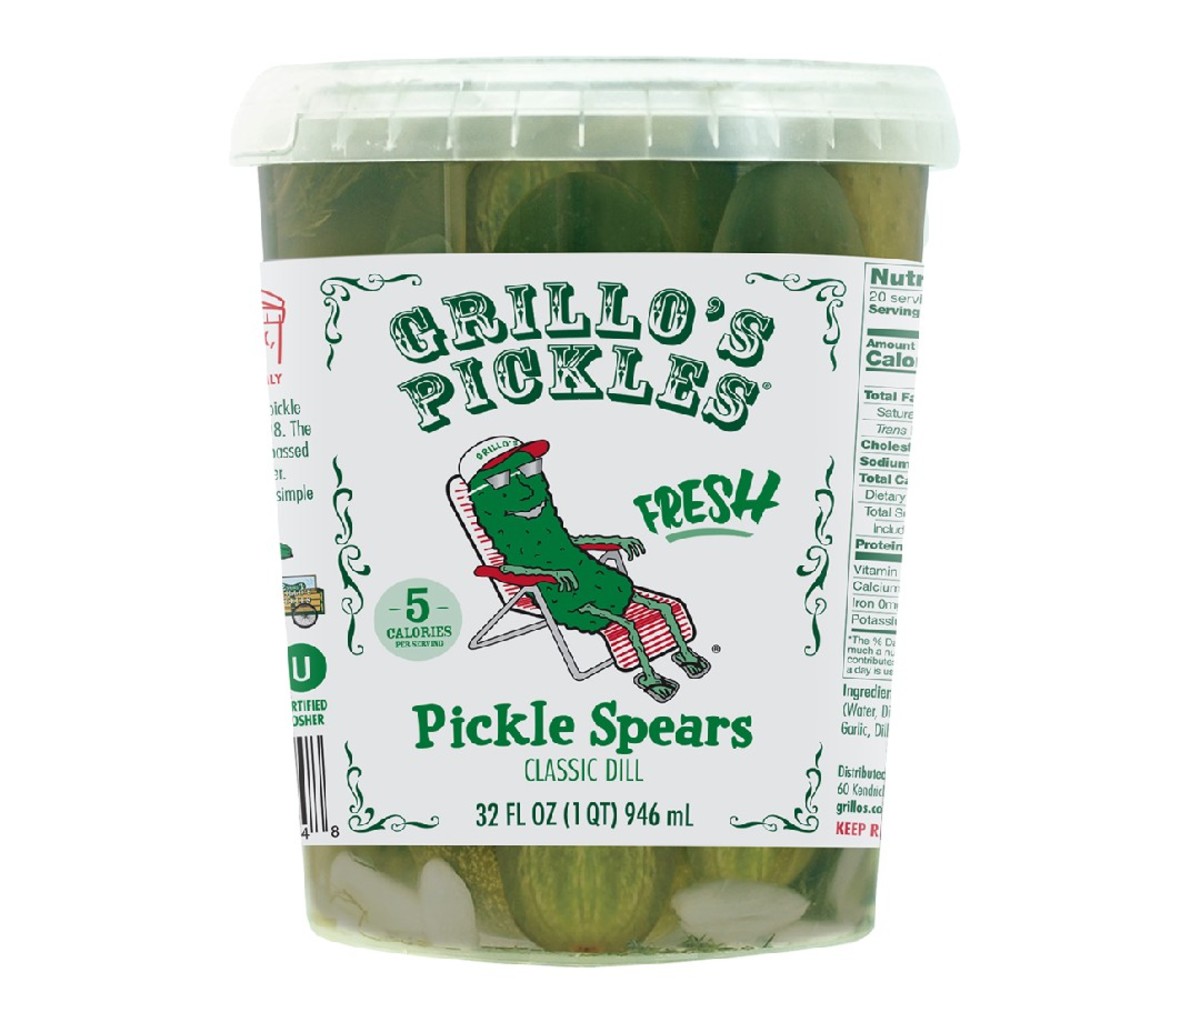 Grillos dill pickle spears